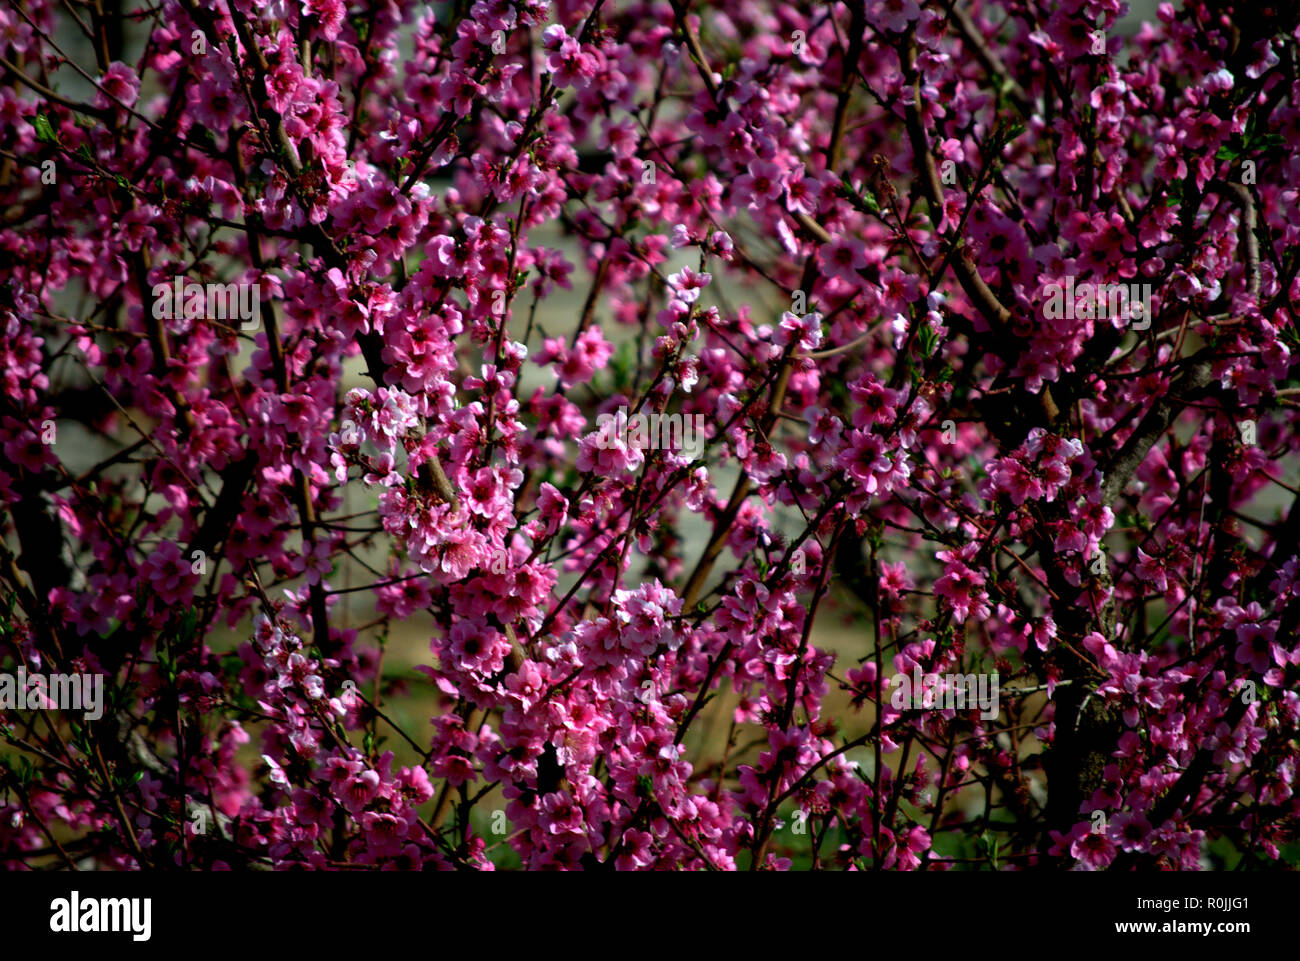 Branches of peach tree  full of pink flowers on natural background Stock Photo